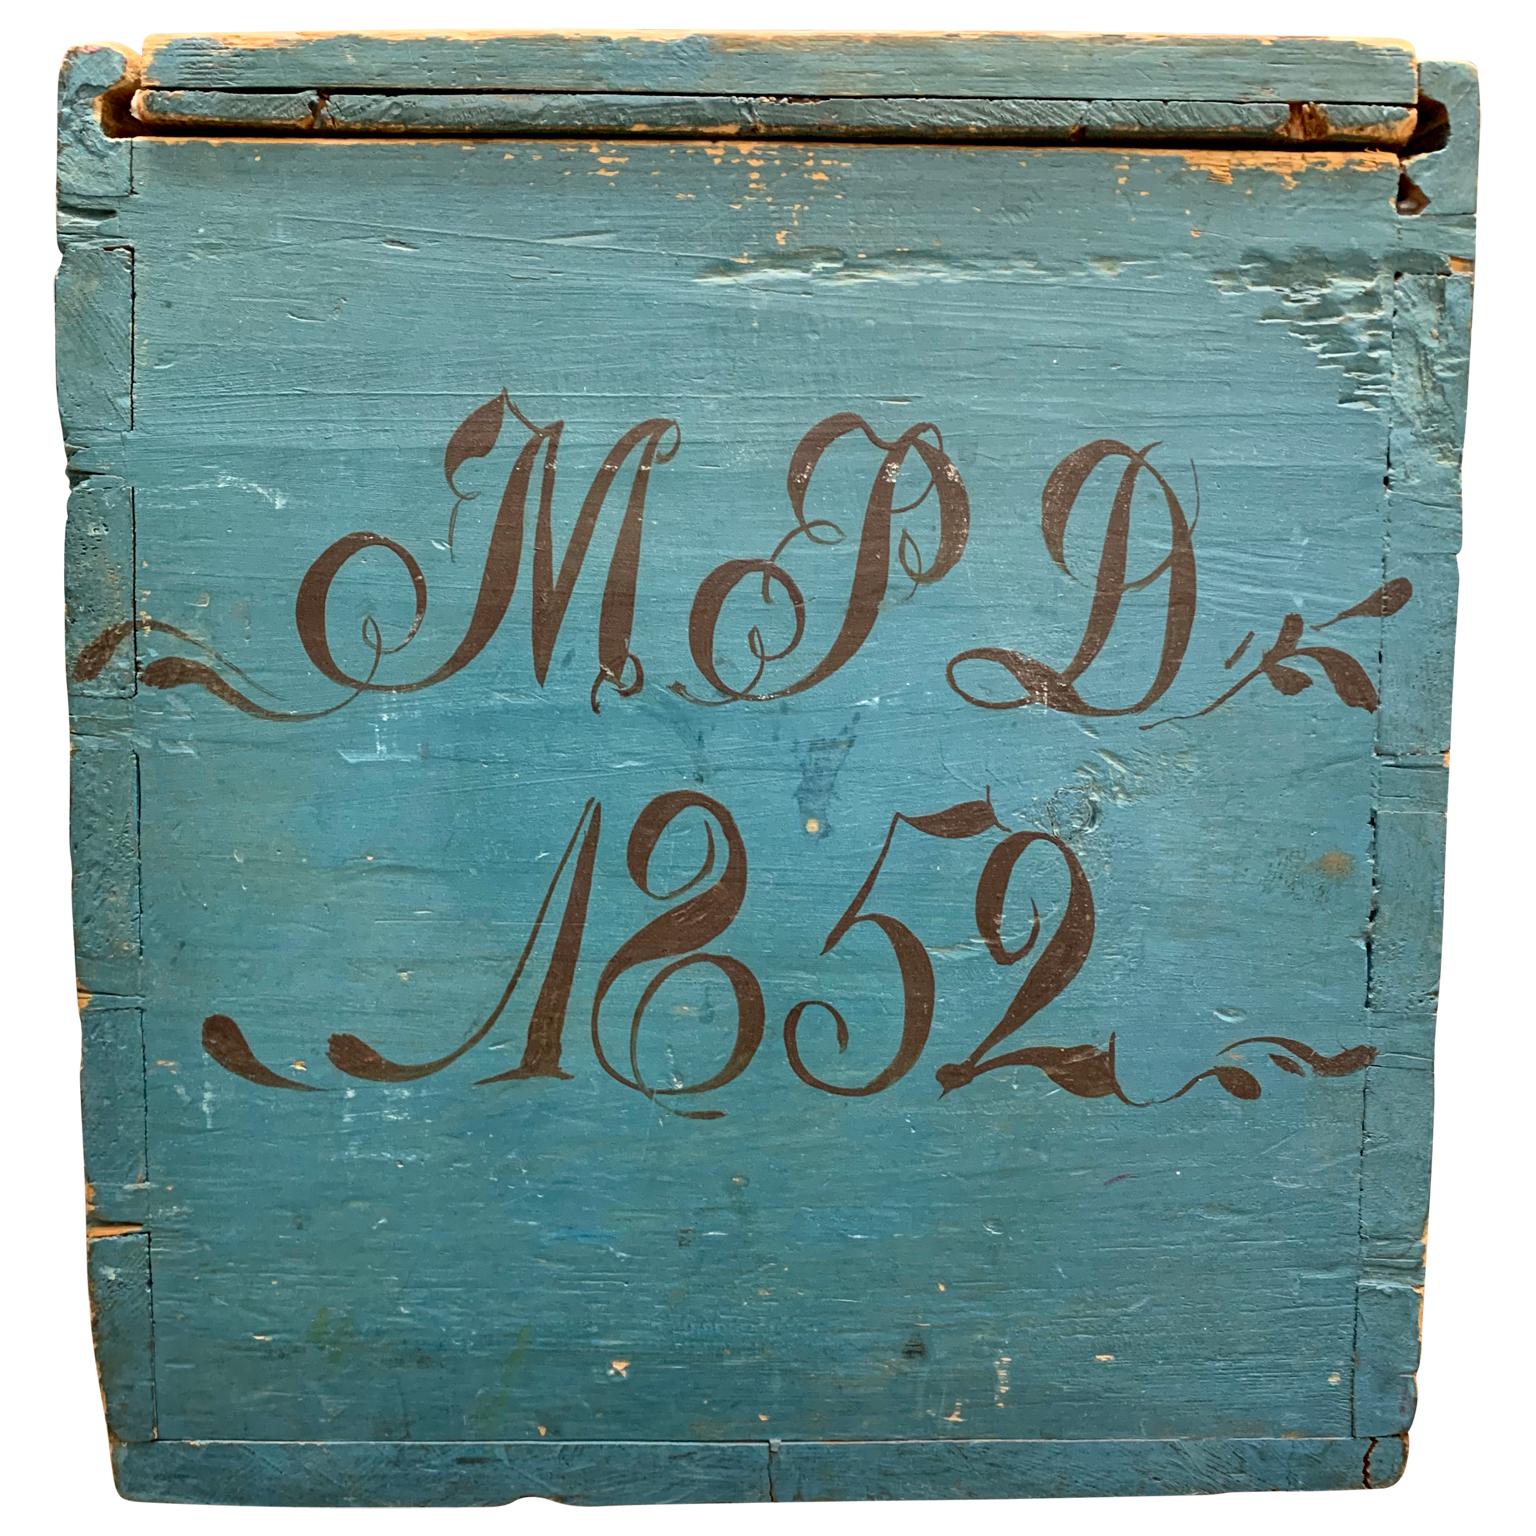 An original blue and red painted Swedish Folk Art wooden box dated 1852. Signed MPD where the D stands for 